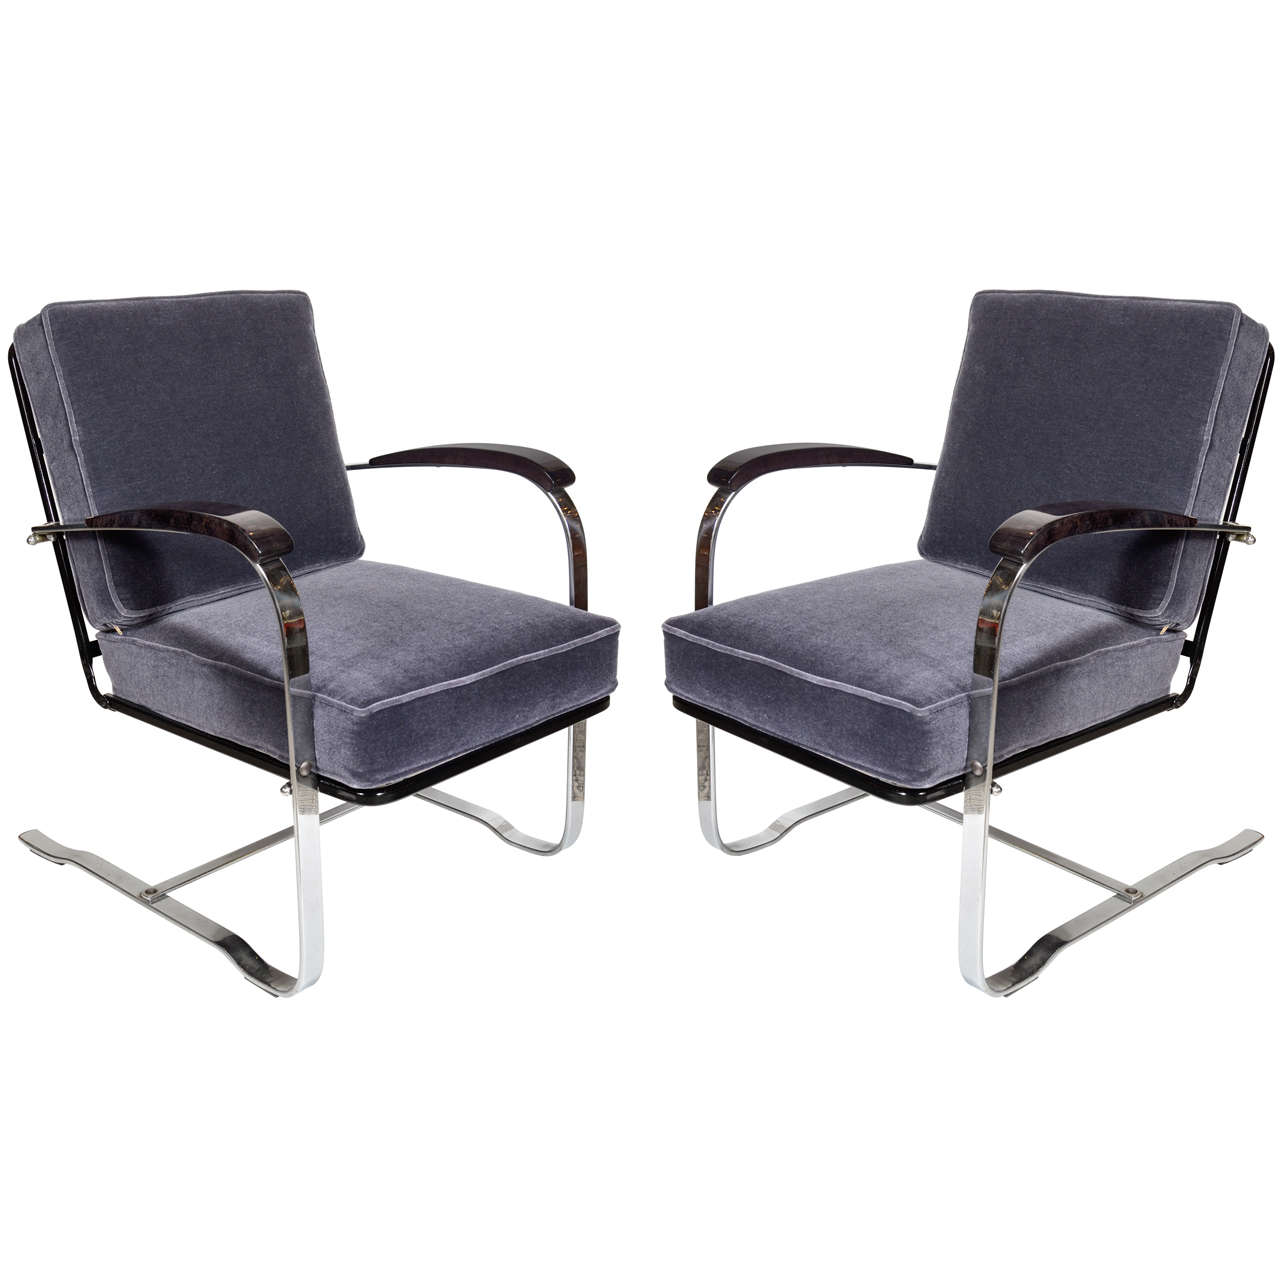 Pair of Art Deco Machine Age Chairs by Wolfgang Hoffman